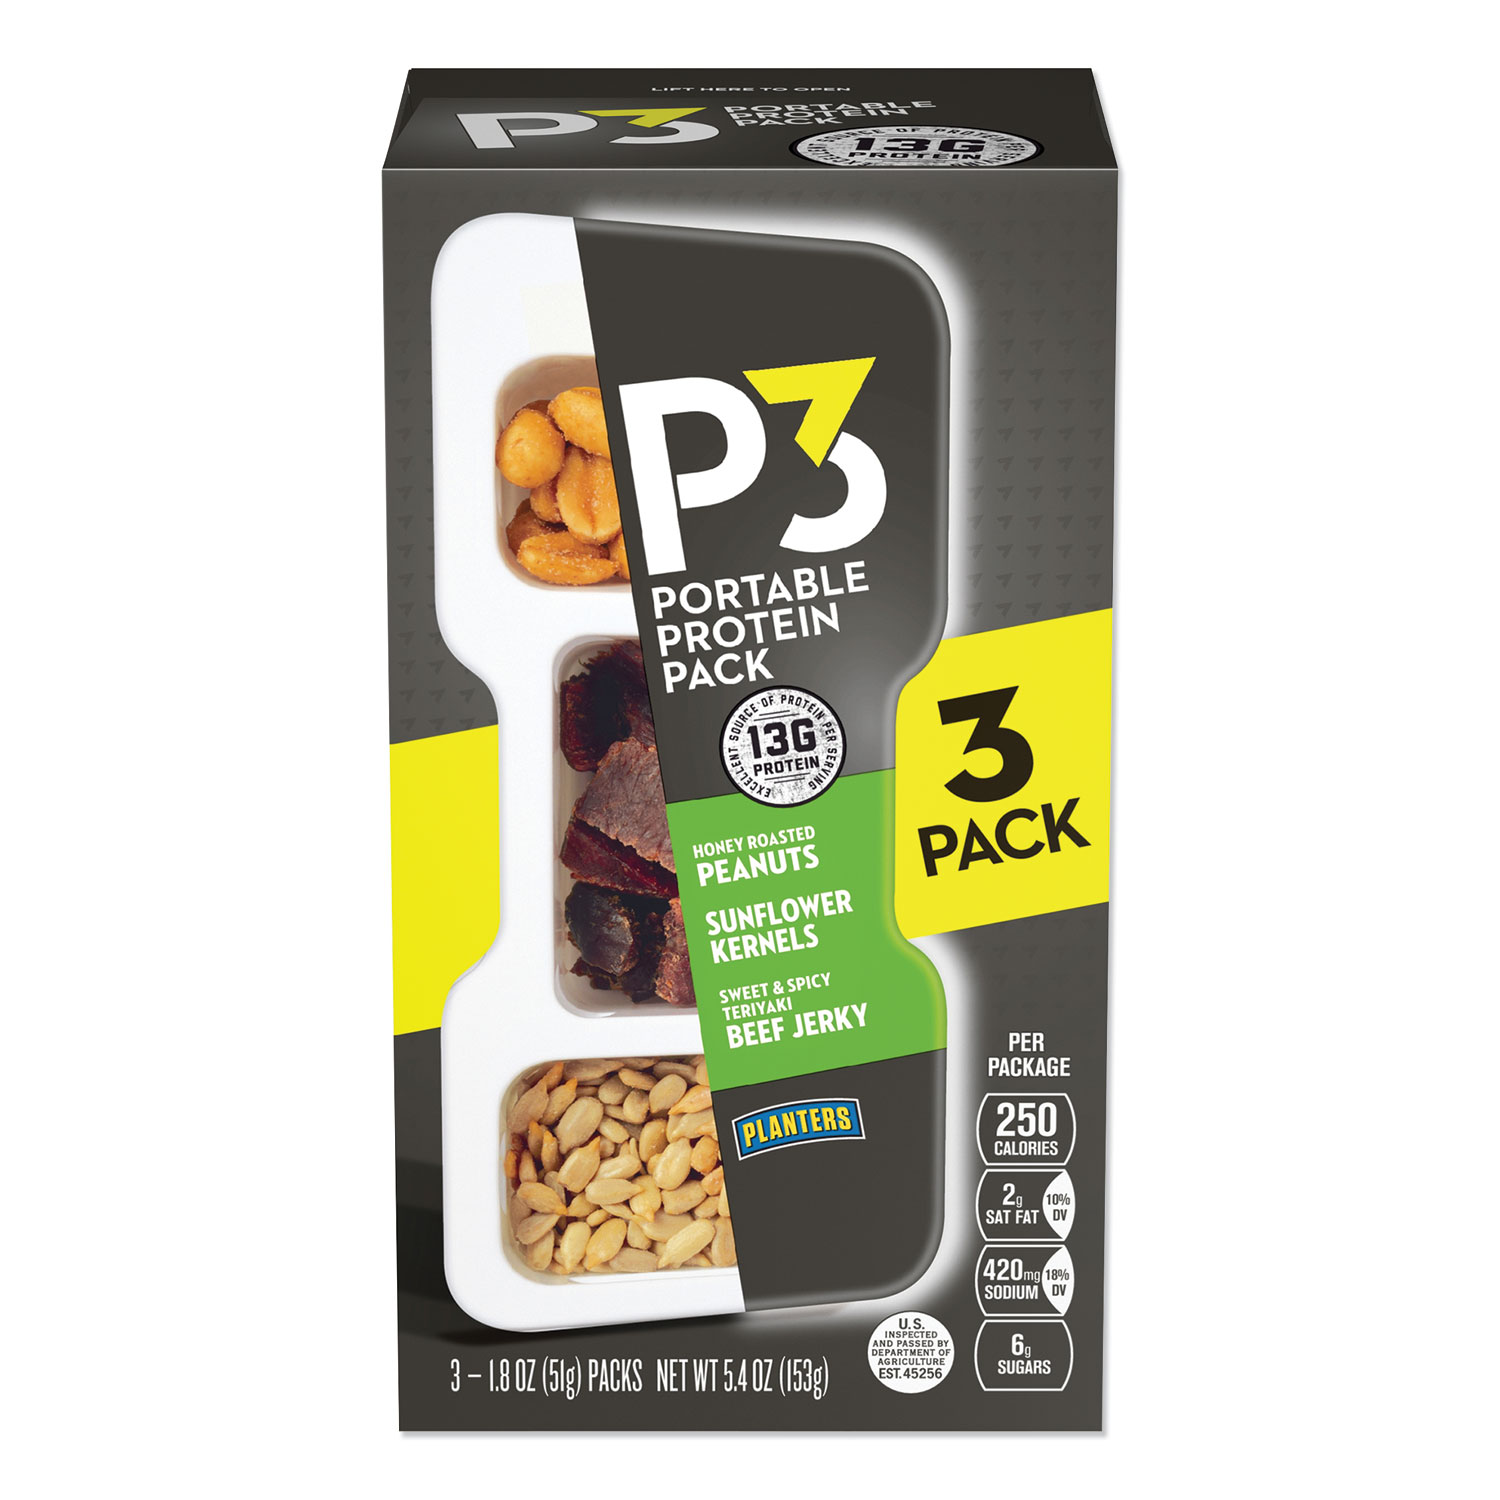  P3 GEN02034 Portable Protein Pack with Planters Peanuts, Honey Roasted Peanuts/Sweet and Spicy Teriyaki Jerky/Sunflower Kernels, 3/Pack (KRF2830802) 